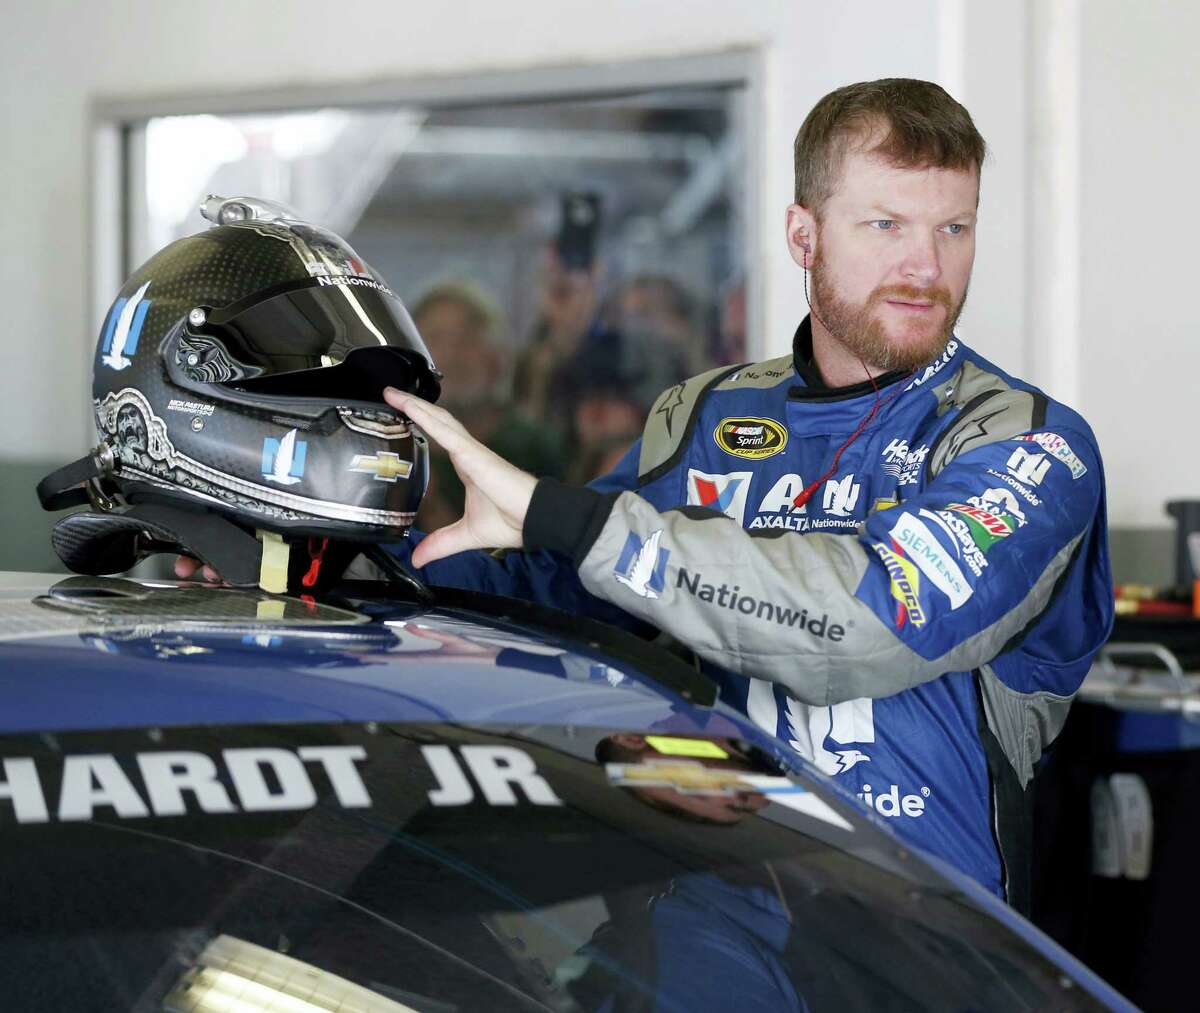 Dale Earnhardt Jr prepares to climb into his car during practice on Friday for Sunday’s Daytona 500.